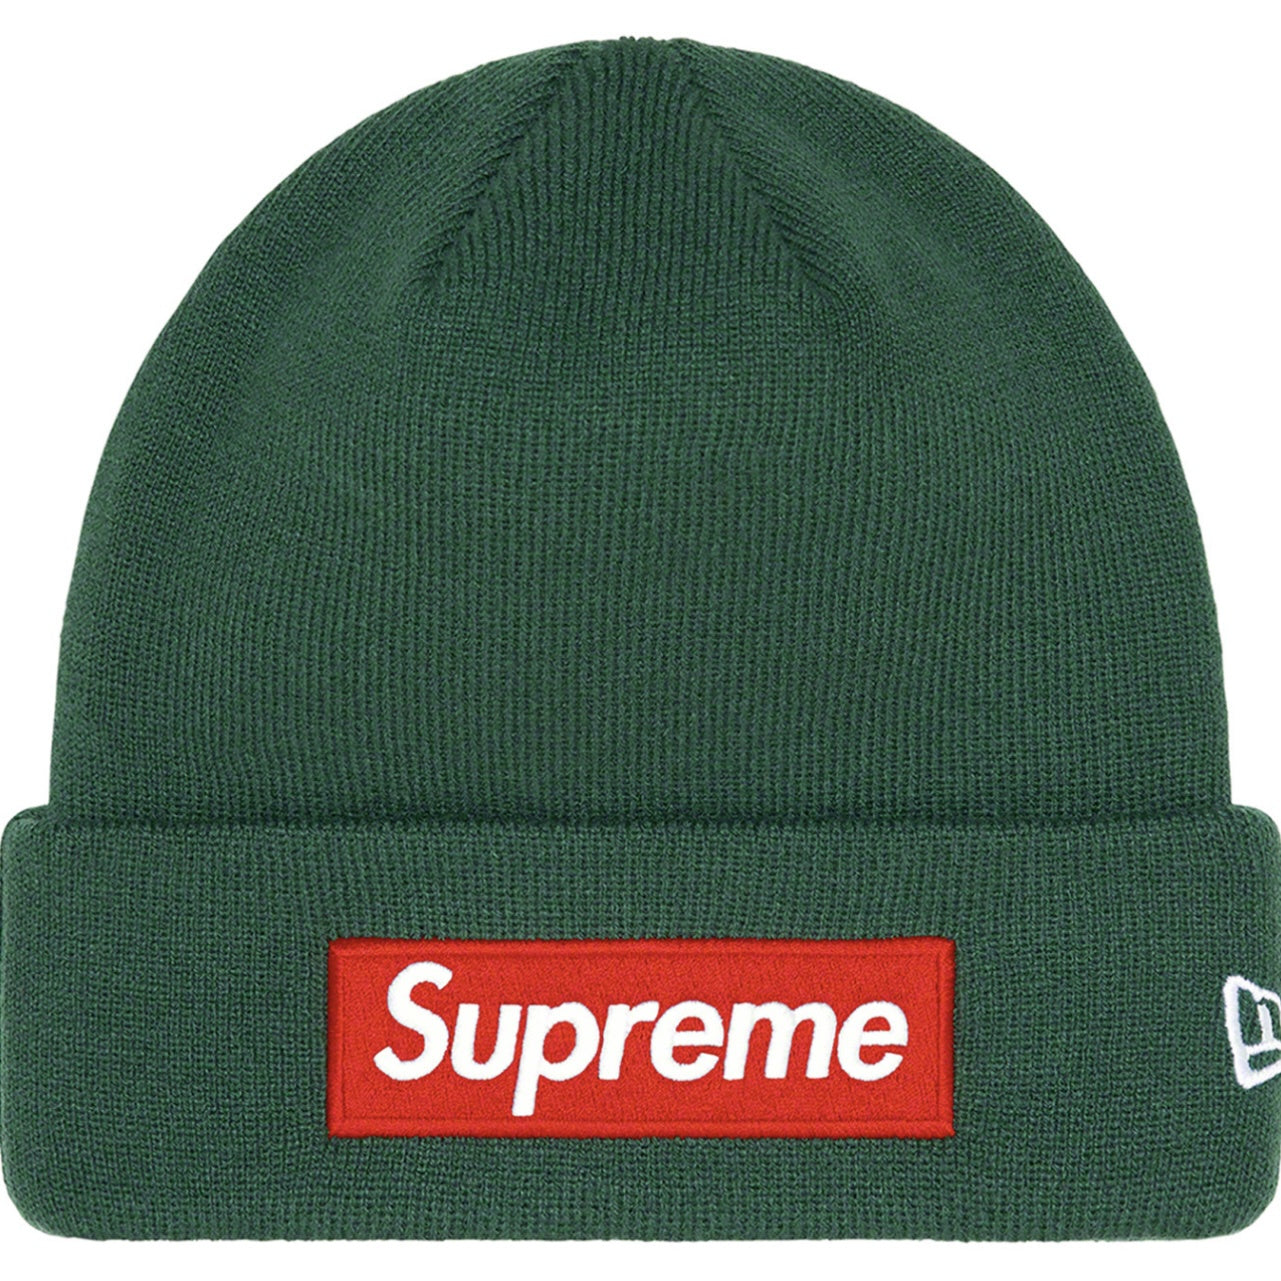 obsessed} Supreme Hats